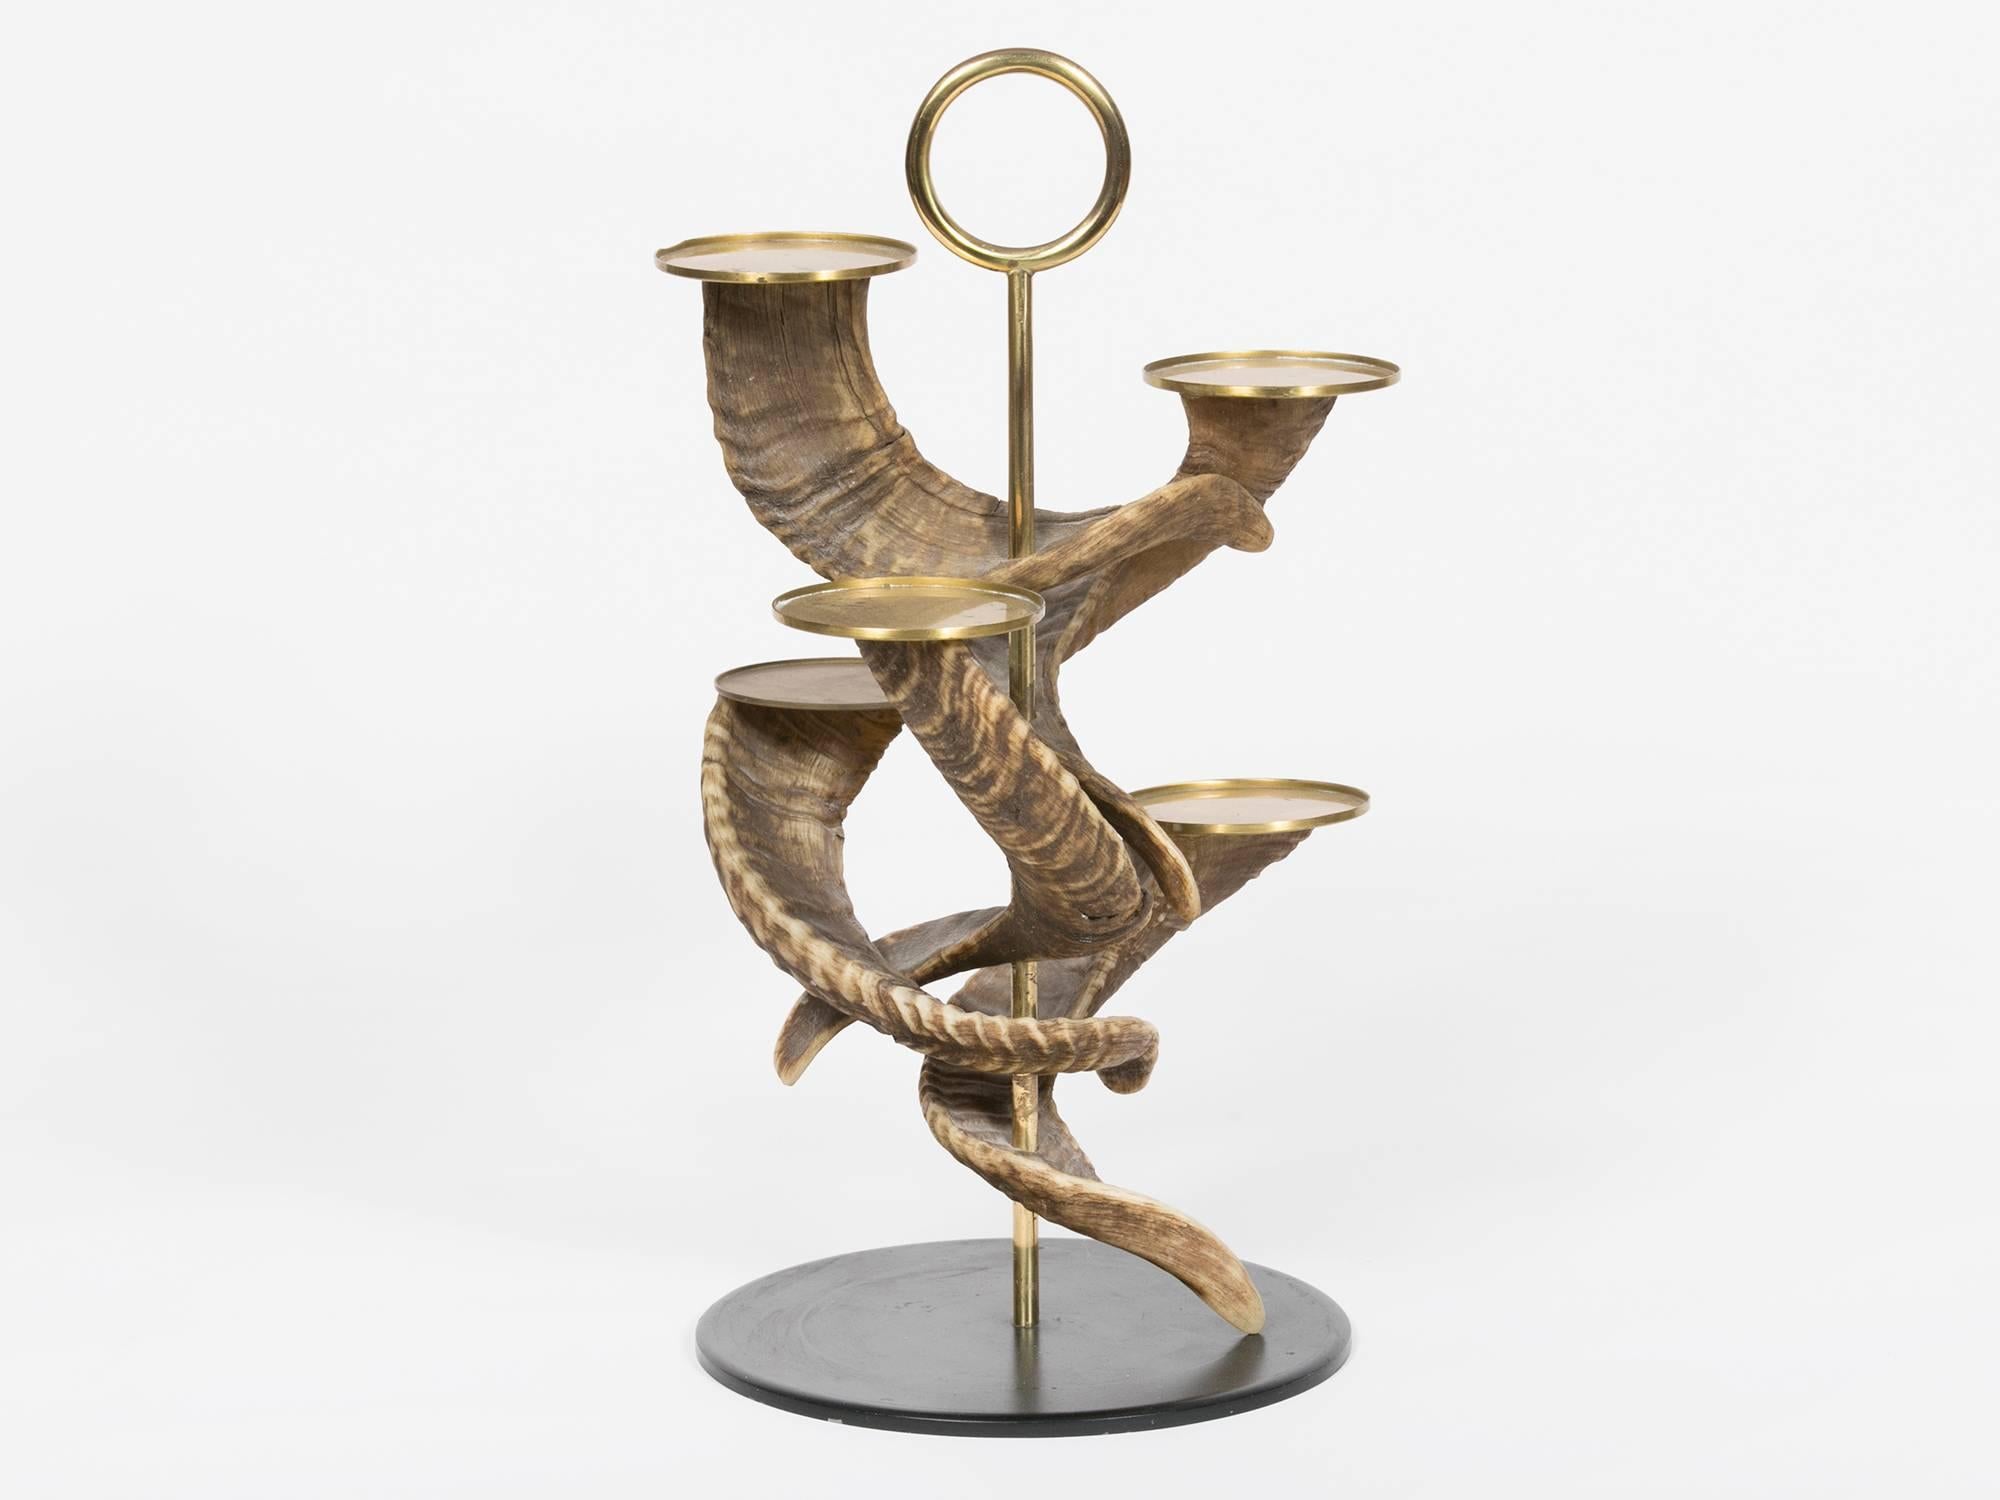 Mouflon horn, brass and enameled steel candelabrum by Viennese master designer Carl Auböck. Holds four candles; original from 1961.